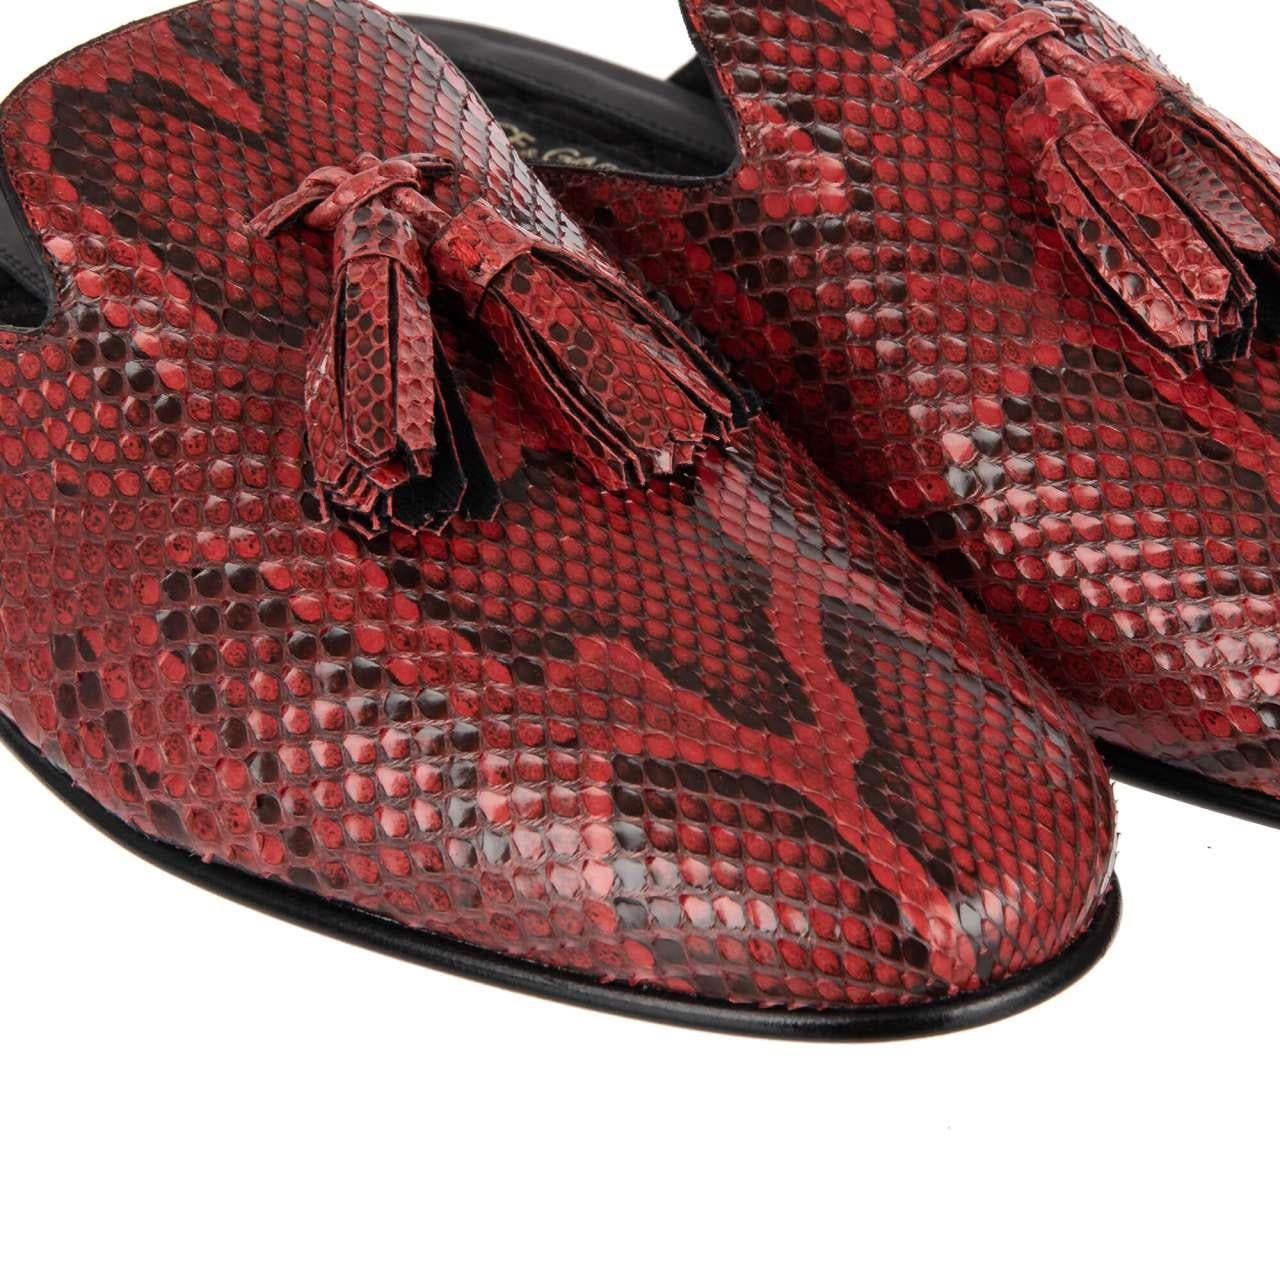 - Snake leather slipper shoes YOUNG POPE with tassels and DG logo in red by DOLCE & GABBANA - MADE IN ITALY - New with Box - Model: A80144-A2043-8H309 - Material: 100% Sneake skin - Sole: Leather - Color: Red - DG metal logo on the side - Satin and